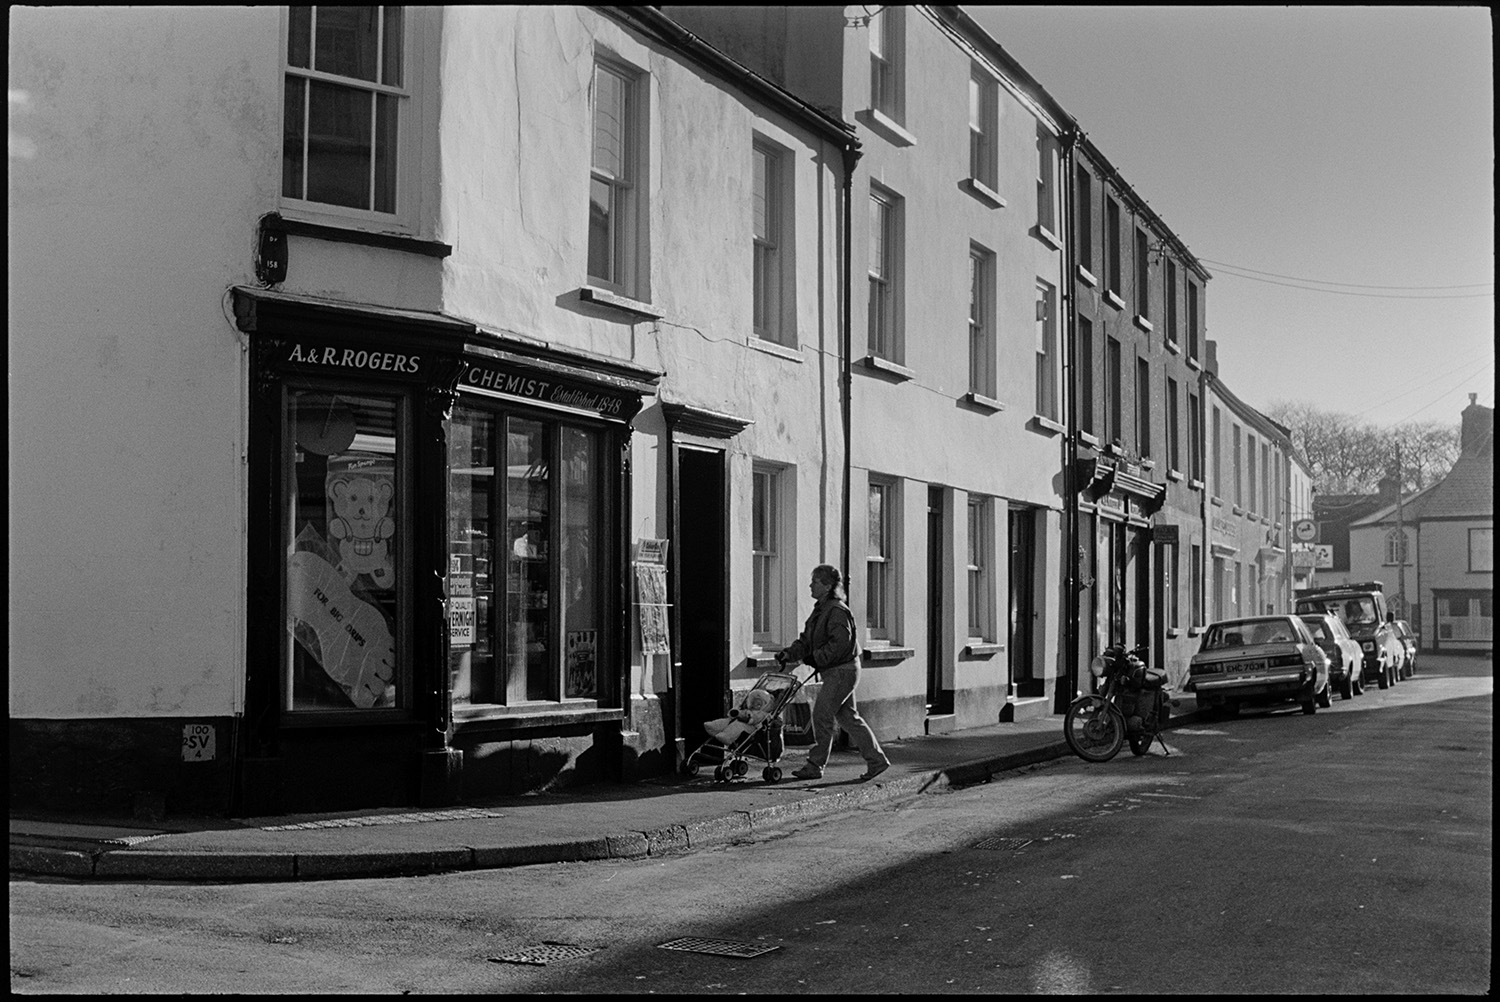 Street scene, early morning. <br /> [A woman pushing a pram past A & R Rogers Chemist in Fore Street, Chulmleigh. A motorbike and parked cars can be seen along the street in the background.]